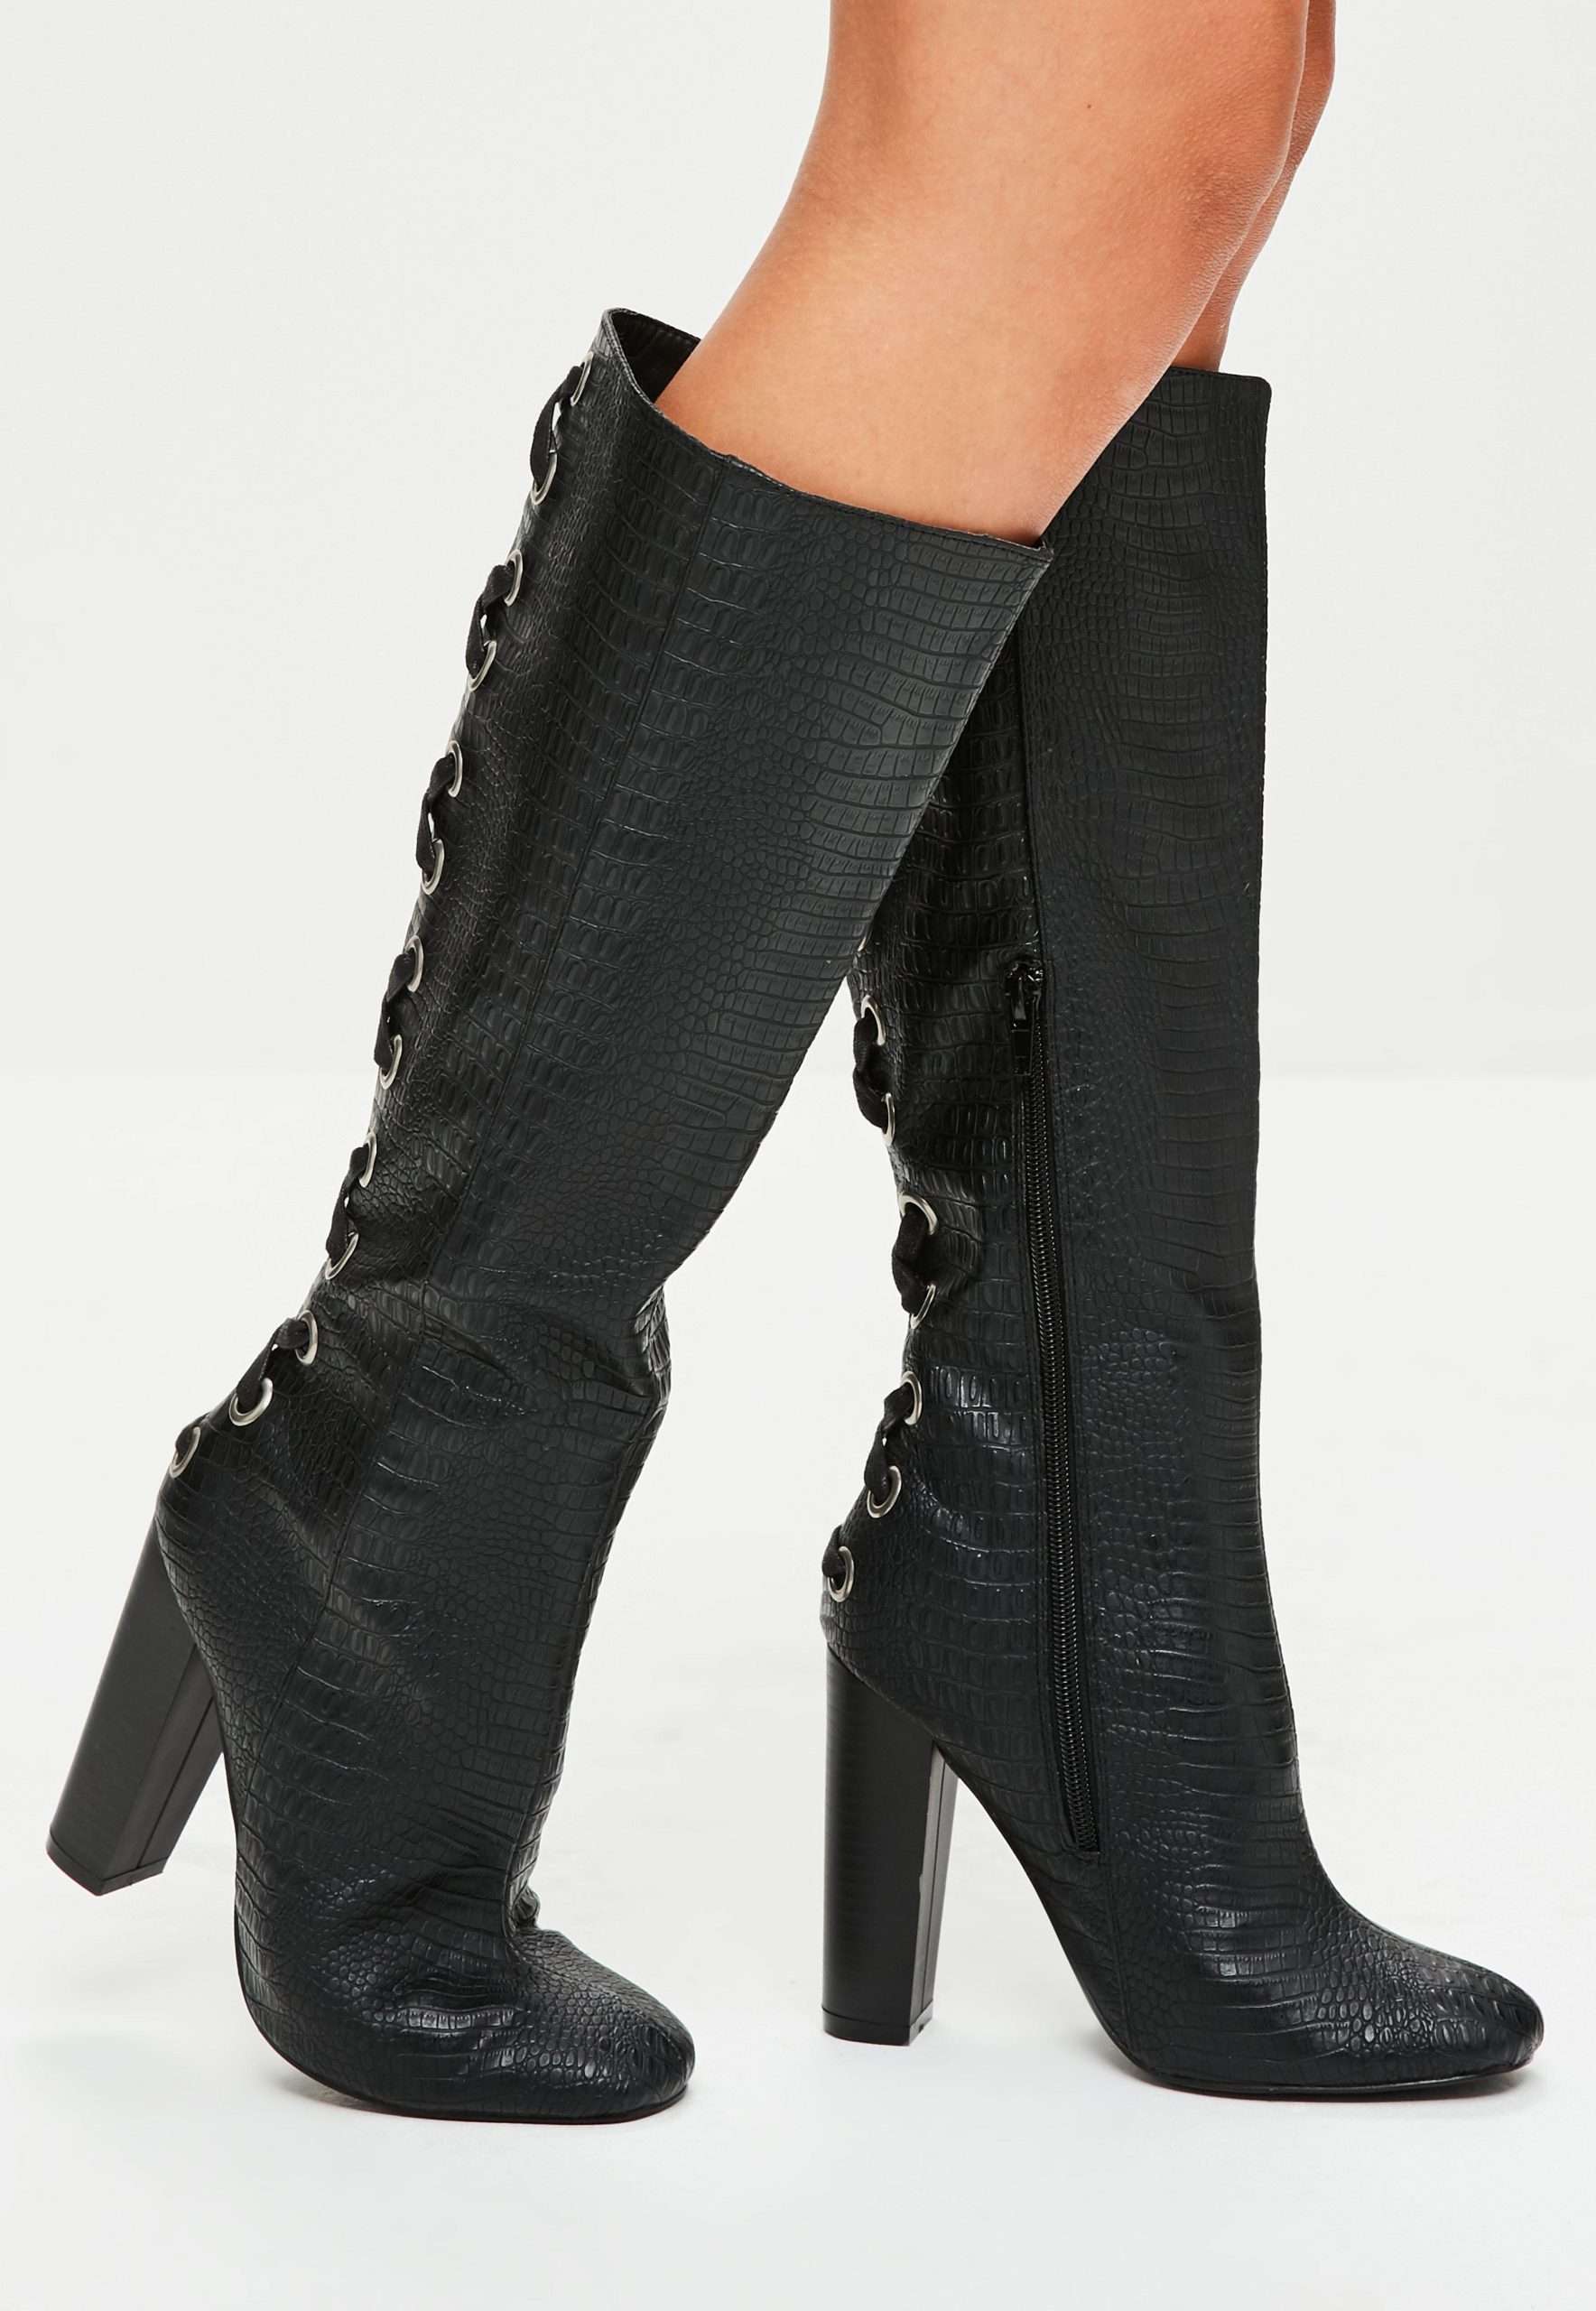 Missguided Black Snake Print Lace Up Knee High Boots